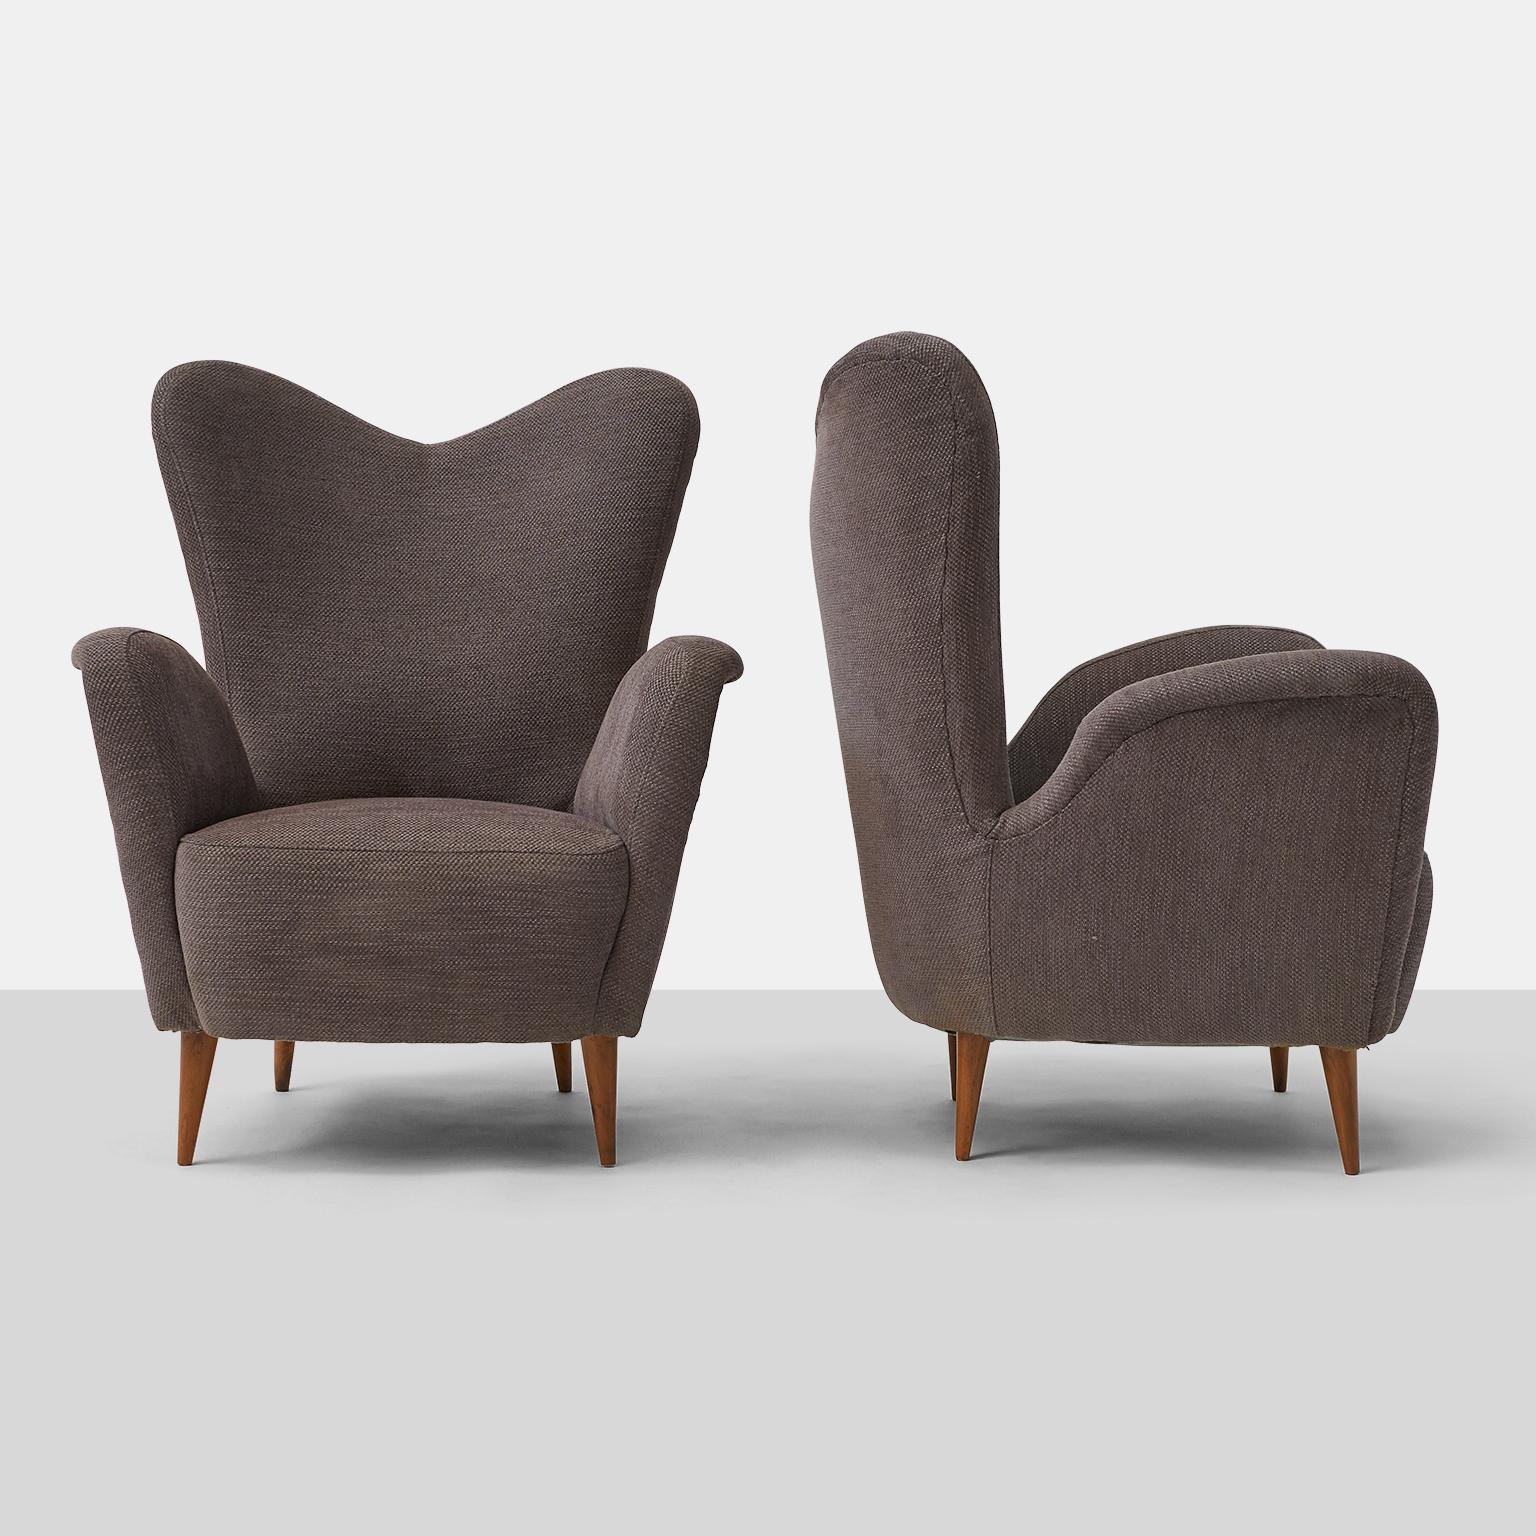 A pair of mid century Italian lounge chairs with gray upholstery and beech feet. The chairs are in very good vintage condition with some restoration to the feet.